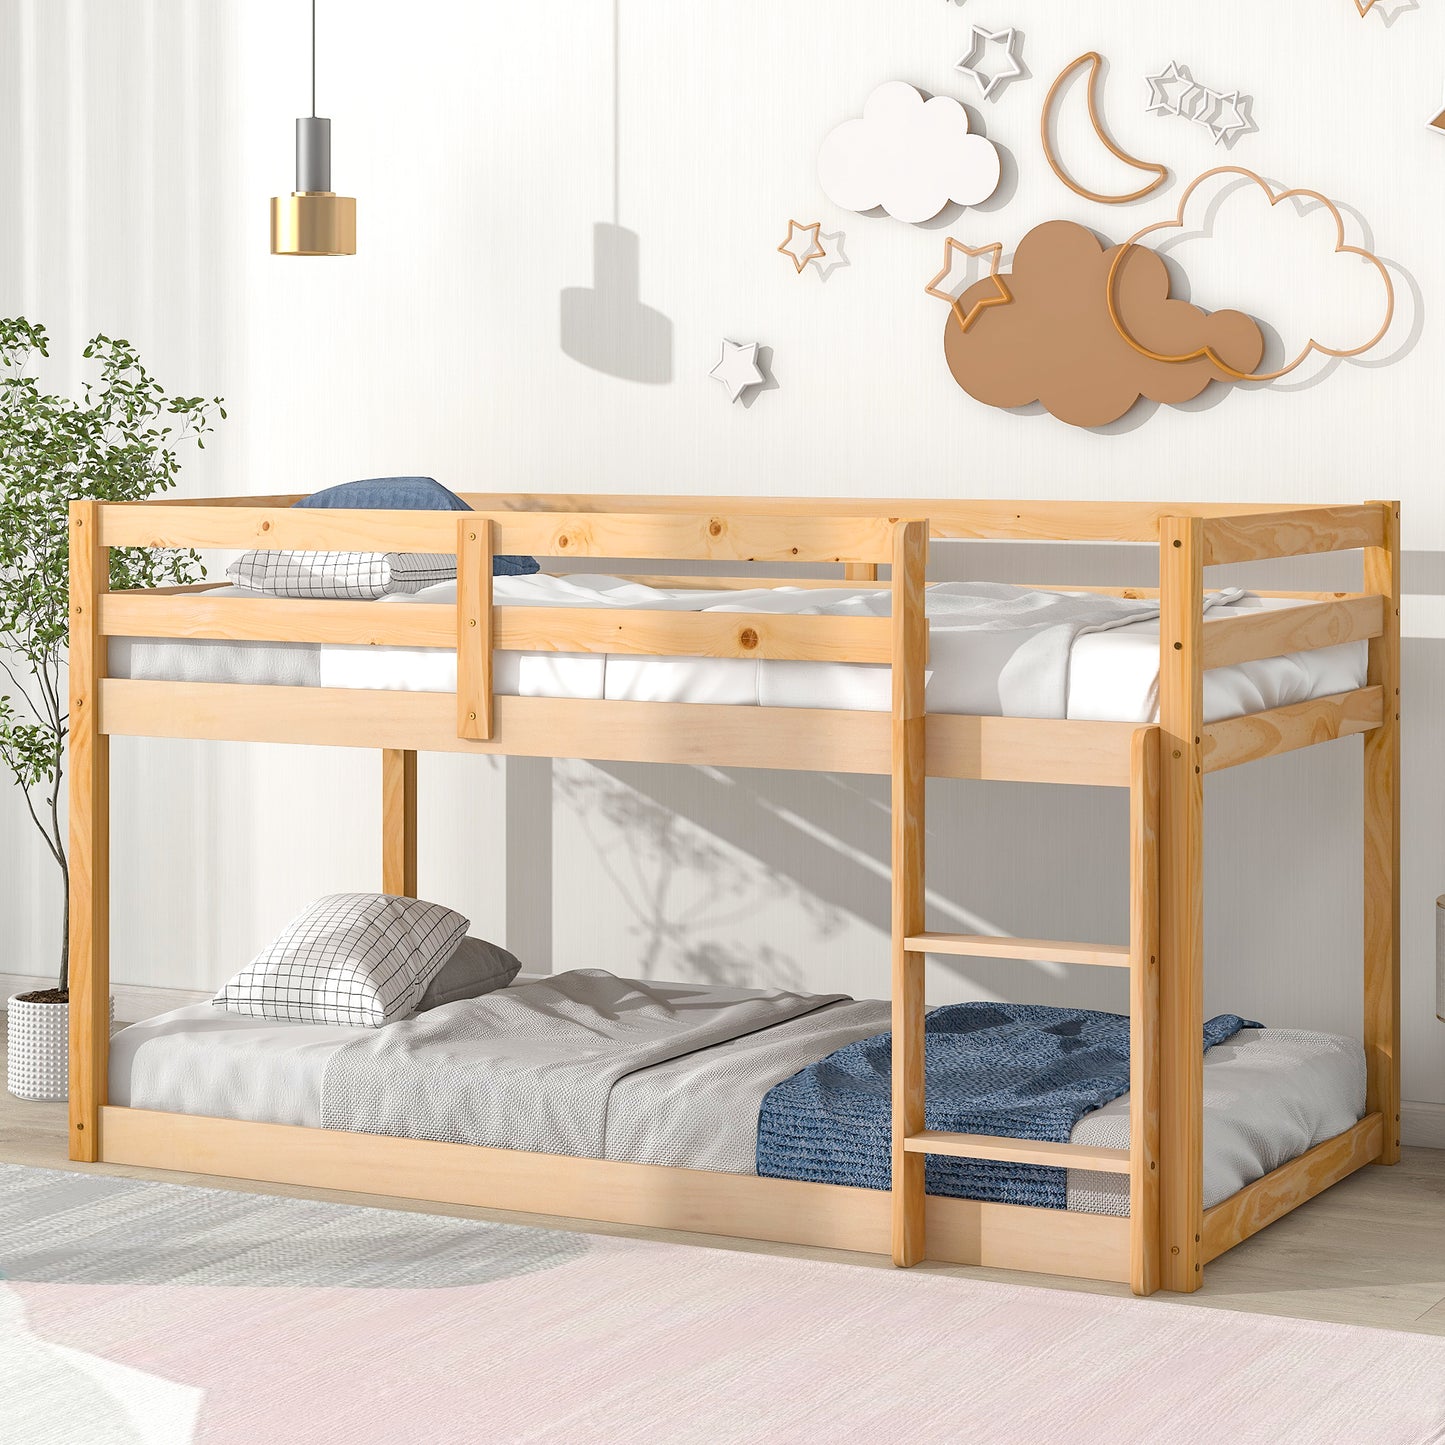 BTMWAY Low Bunk Beds for Kids, New Upgraded Twin Over Twin Floor Bunk Bed with Safety Guard Rail and Ladder